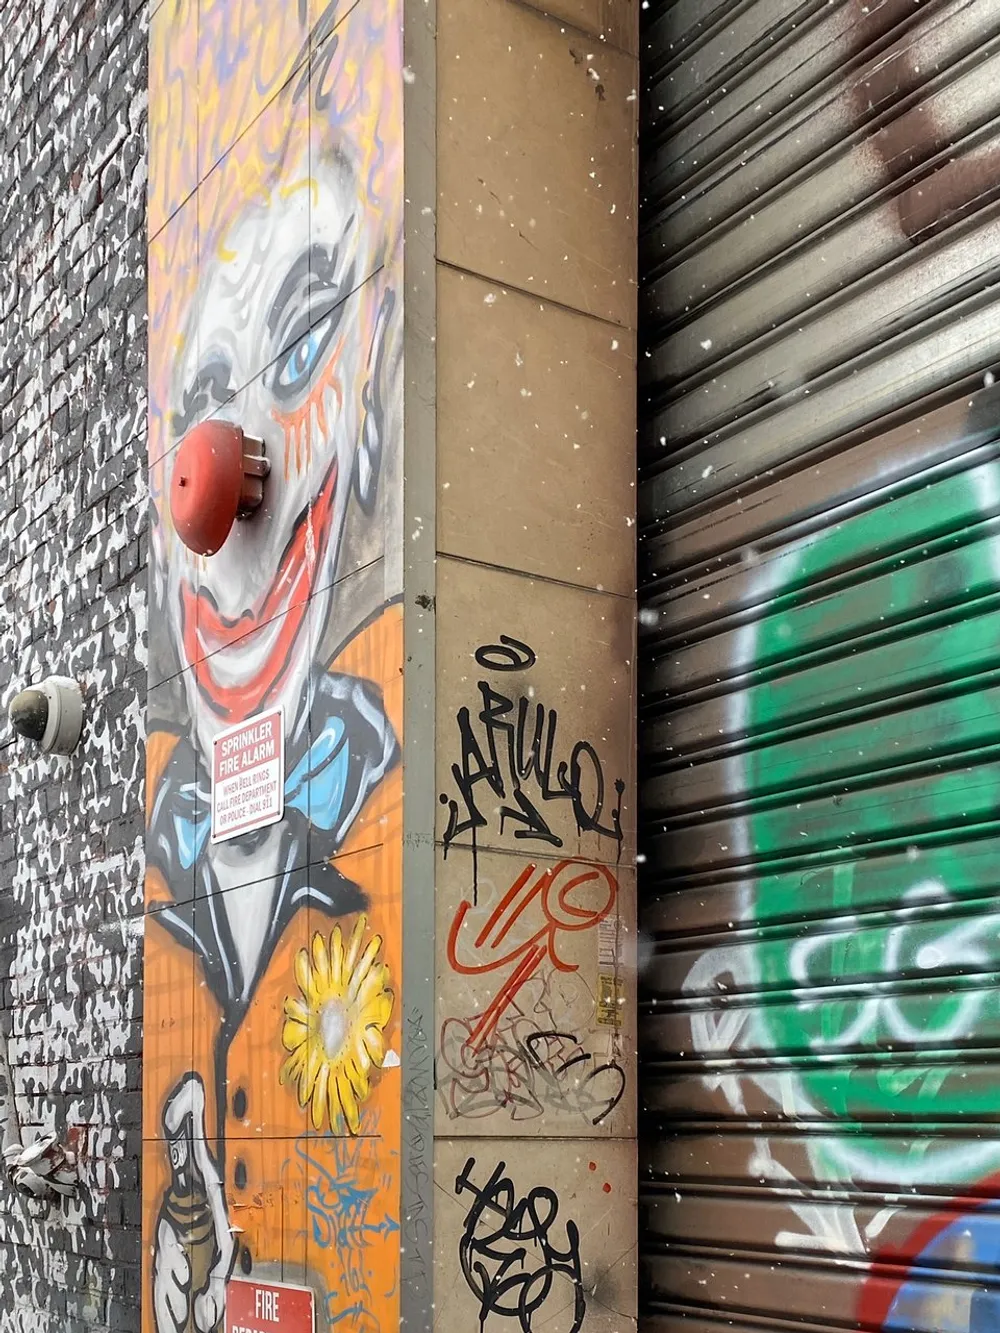 The image shows an urban wall with a vibrant clown graffiti artwork alongside various tags and a partially visible metal shutter